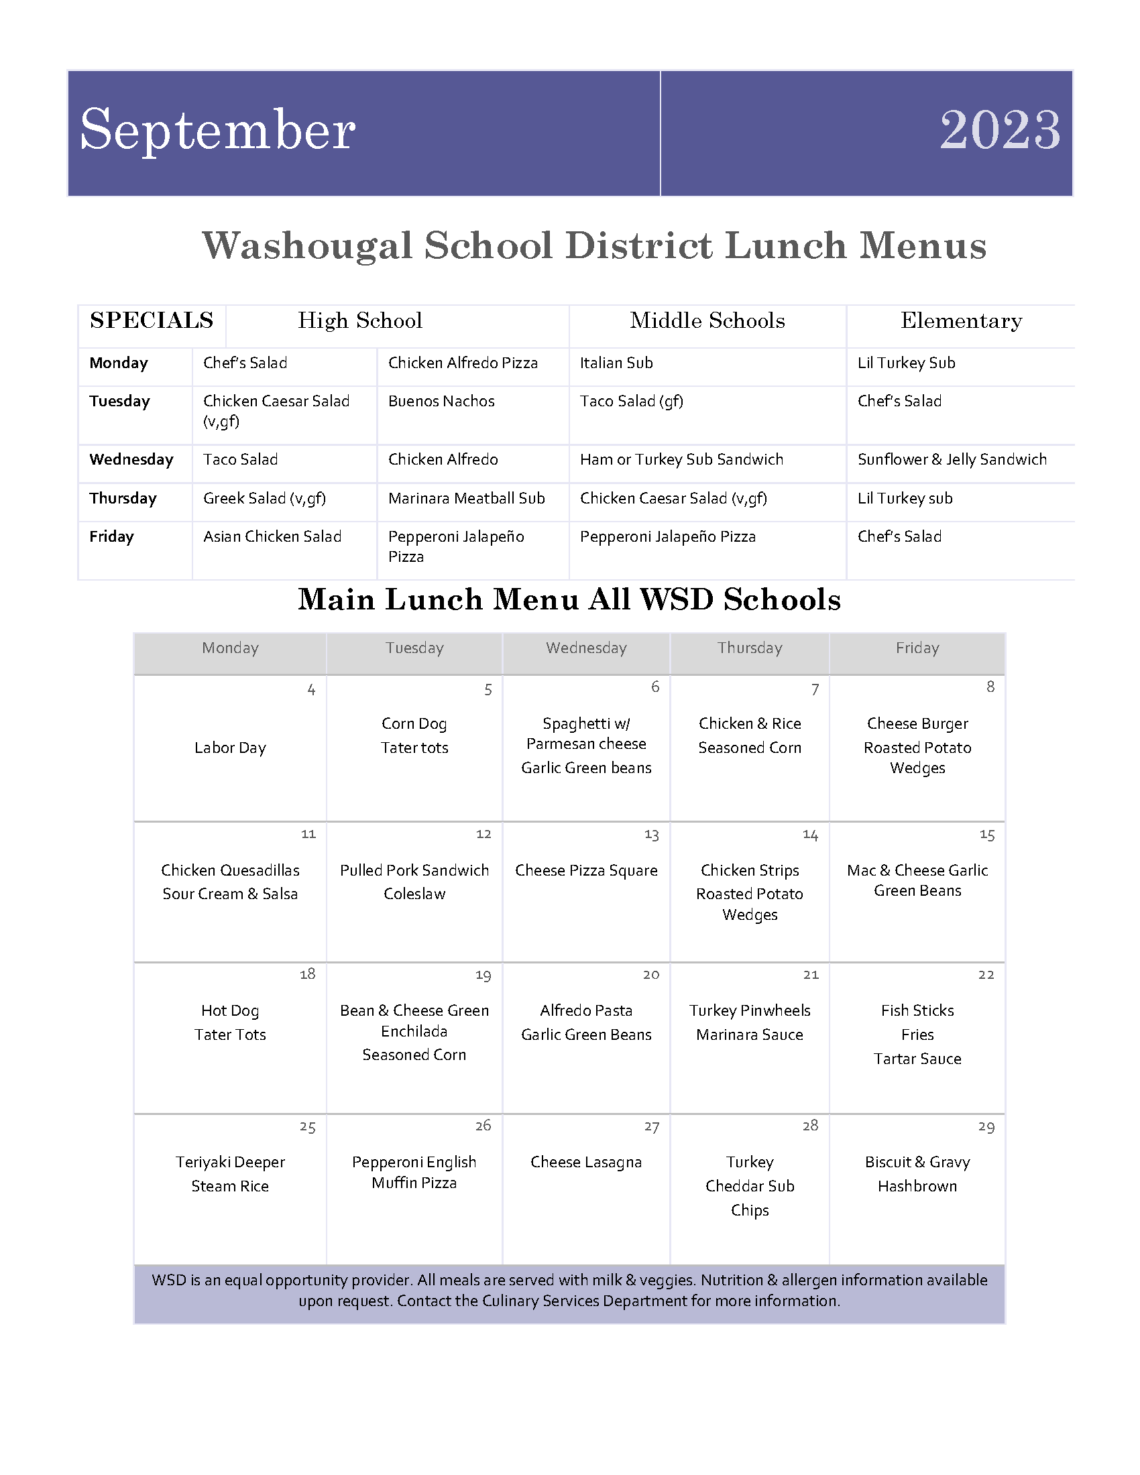 Lunch menu, click link below for accessible PDF version